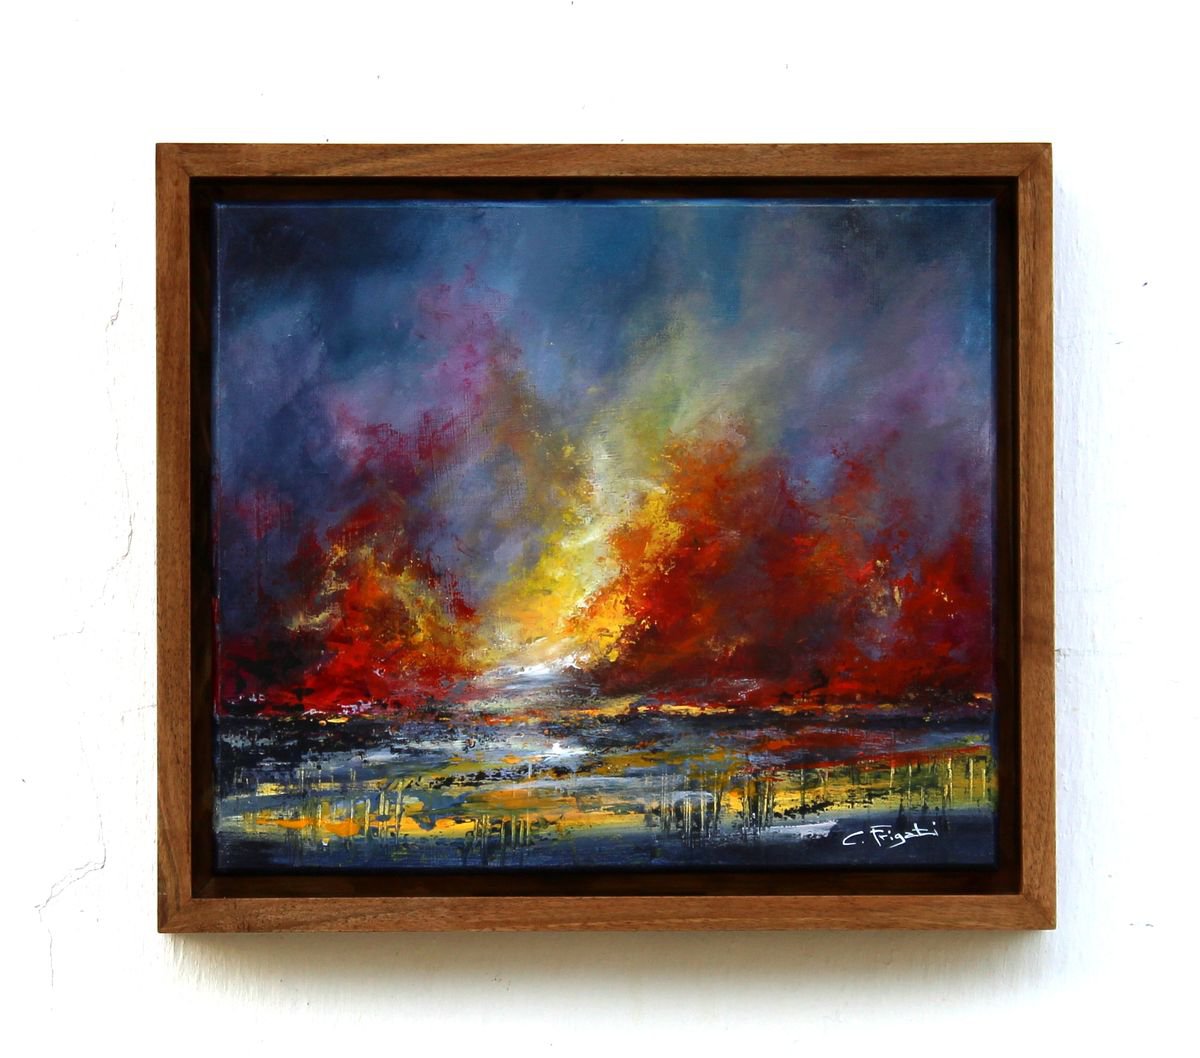 The Clash of Angels #5 -Framed abstract landscape by Cecilia Frigati